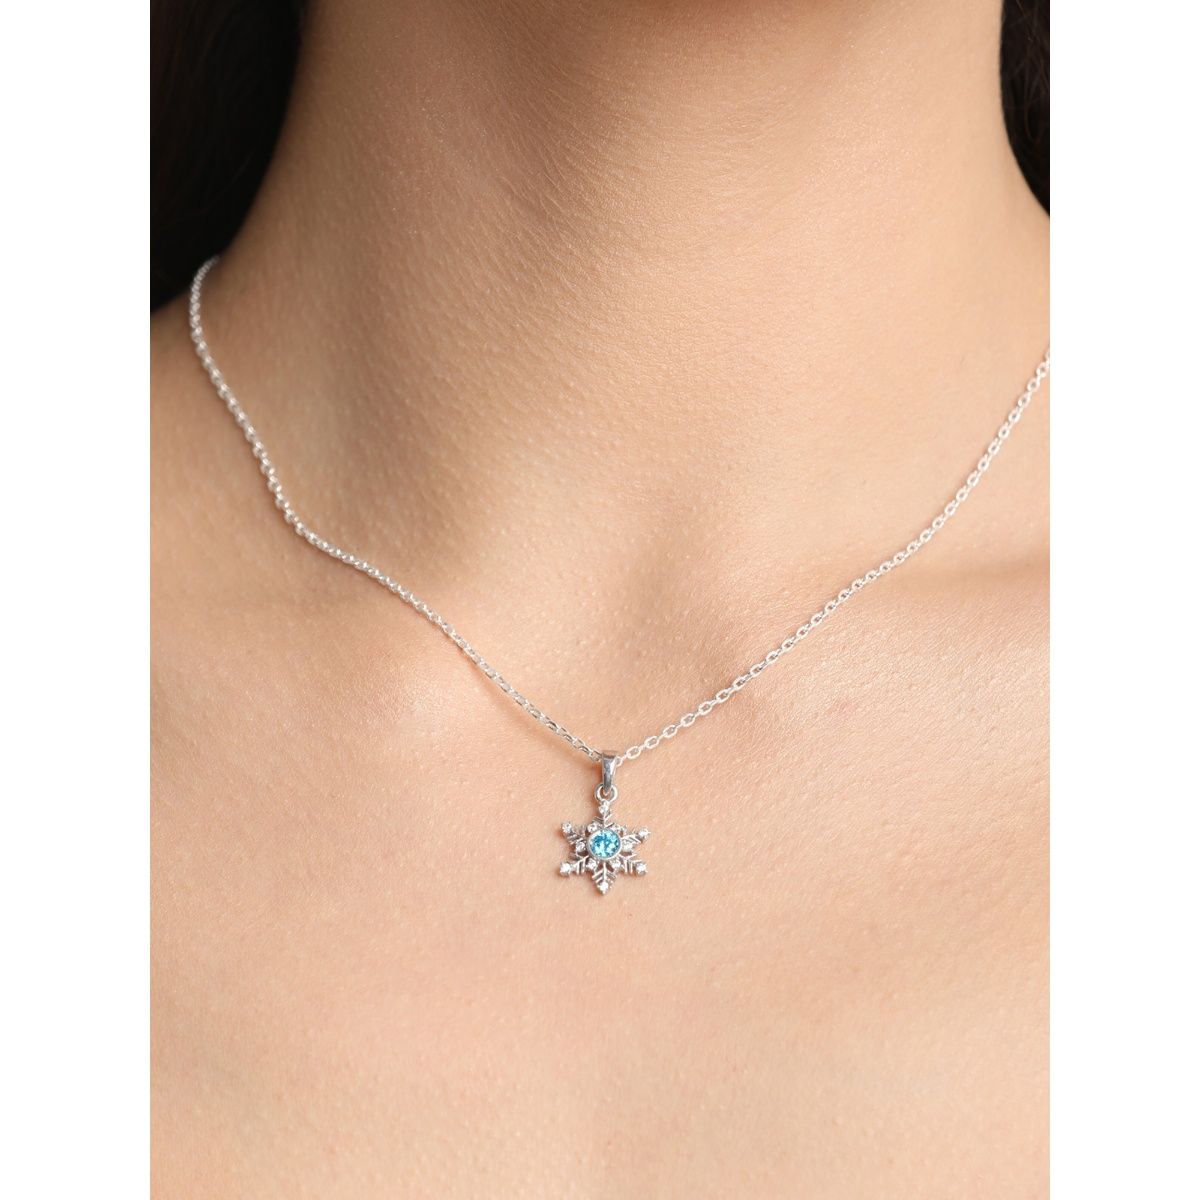 Buy Diamond Accent Snowflake Pendant in Sterling Silver with Stainless  Steel Necklace 20 Inches at ShopLC.